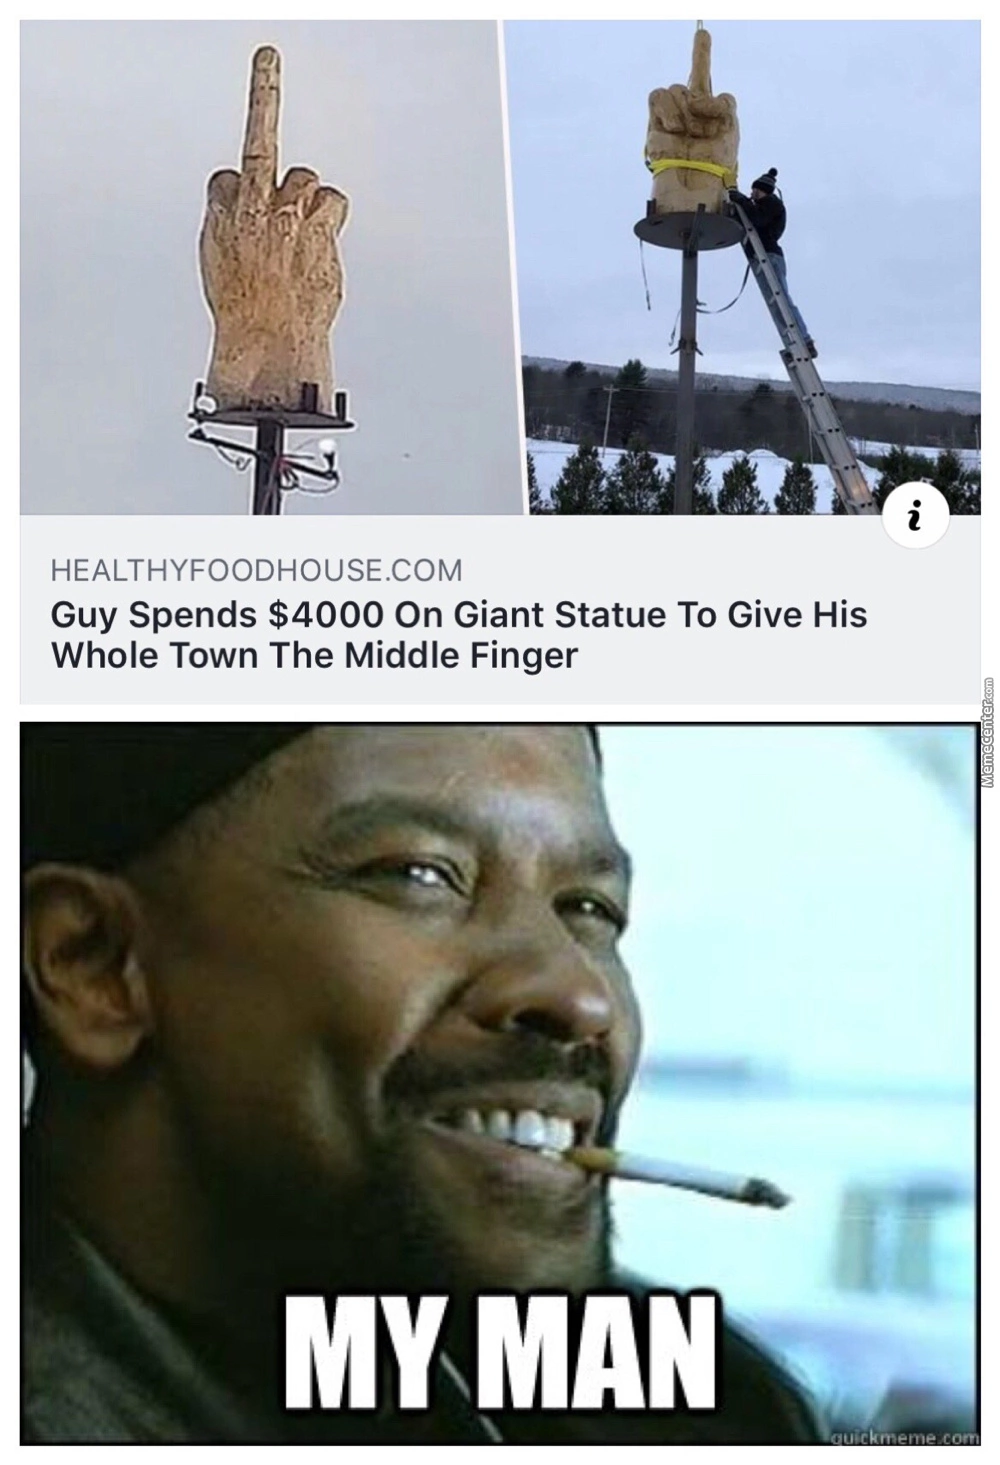 denzel washington training day - Healthyfoodhouse.Com Guy Spends $4000 On Giant Statue To Give His Whole Town The Middle Finger My Man